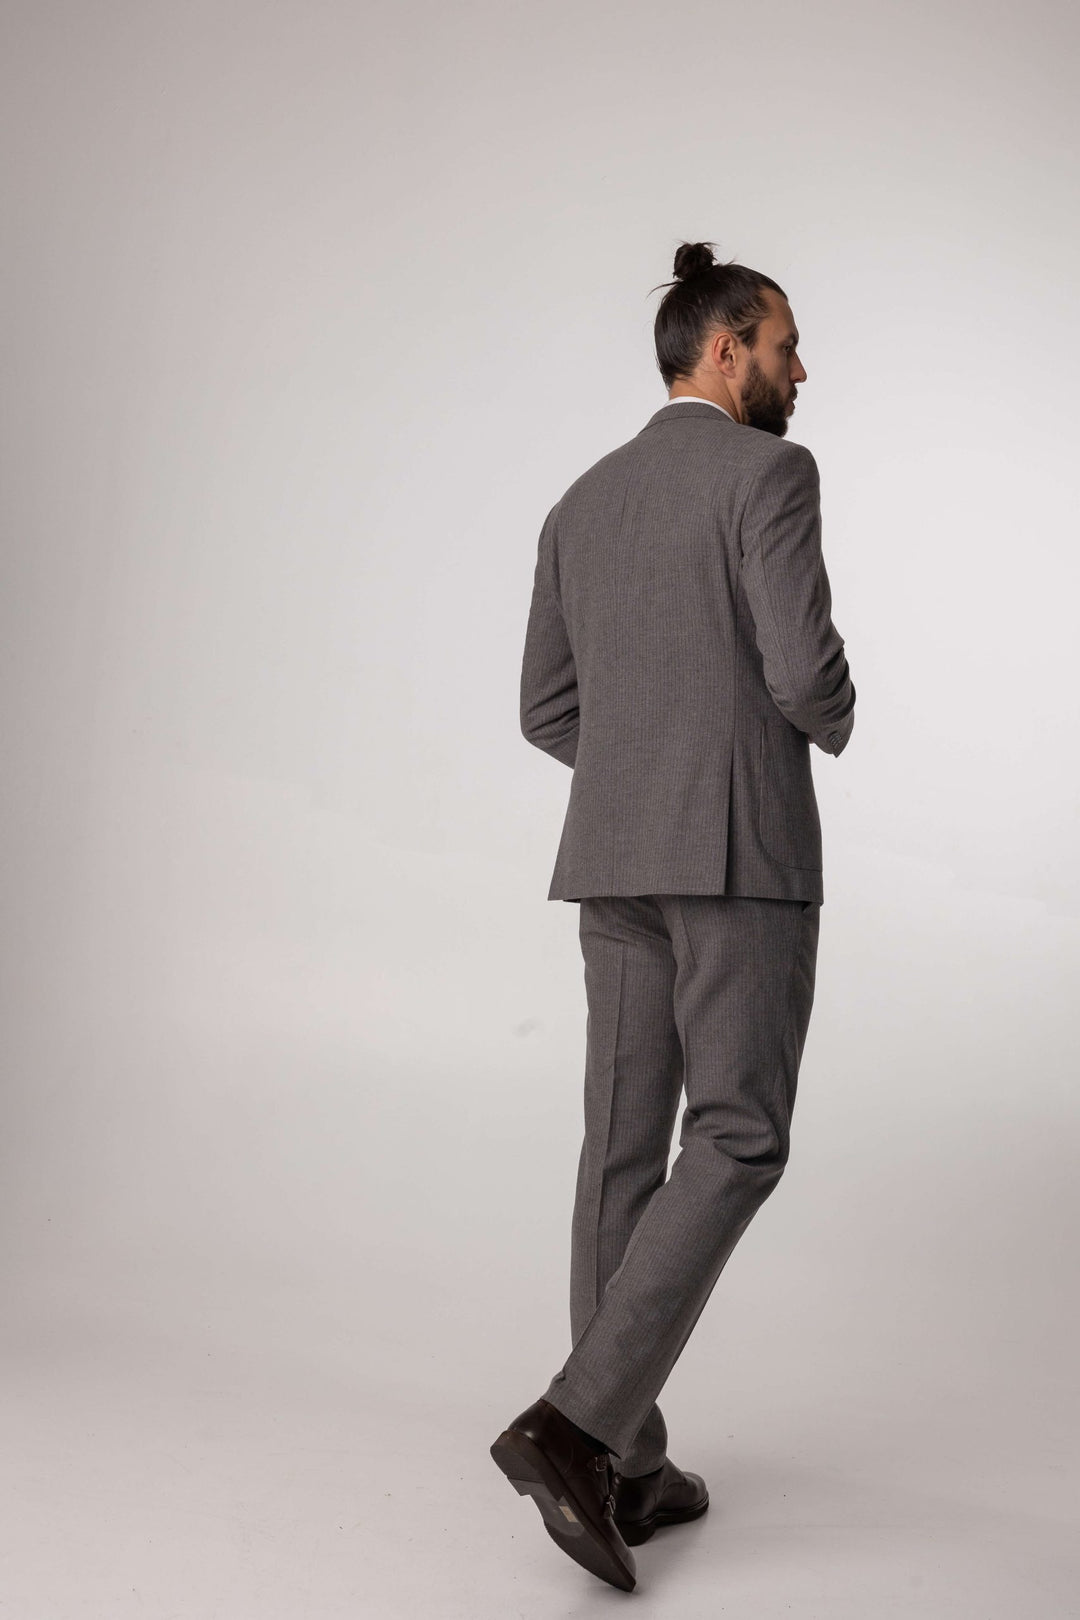 Three-piece gray suit with brown stripes